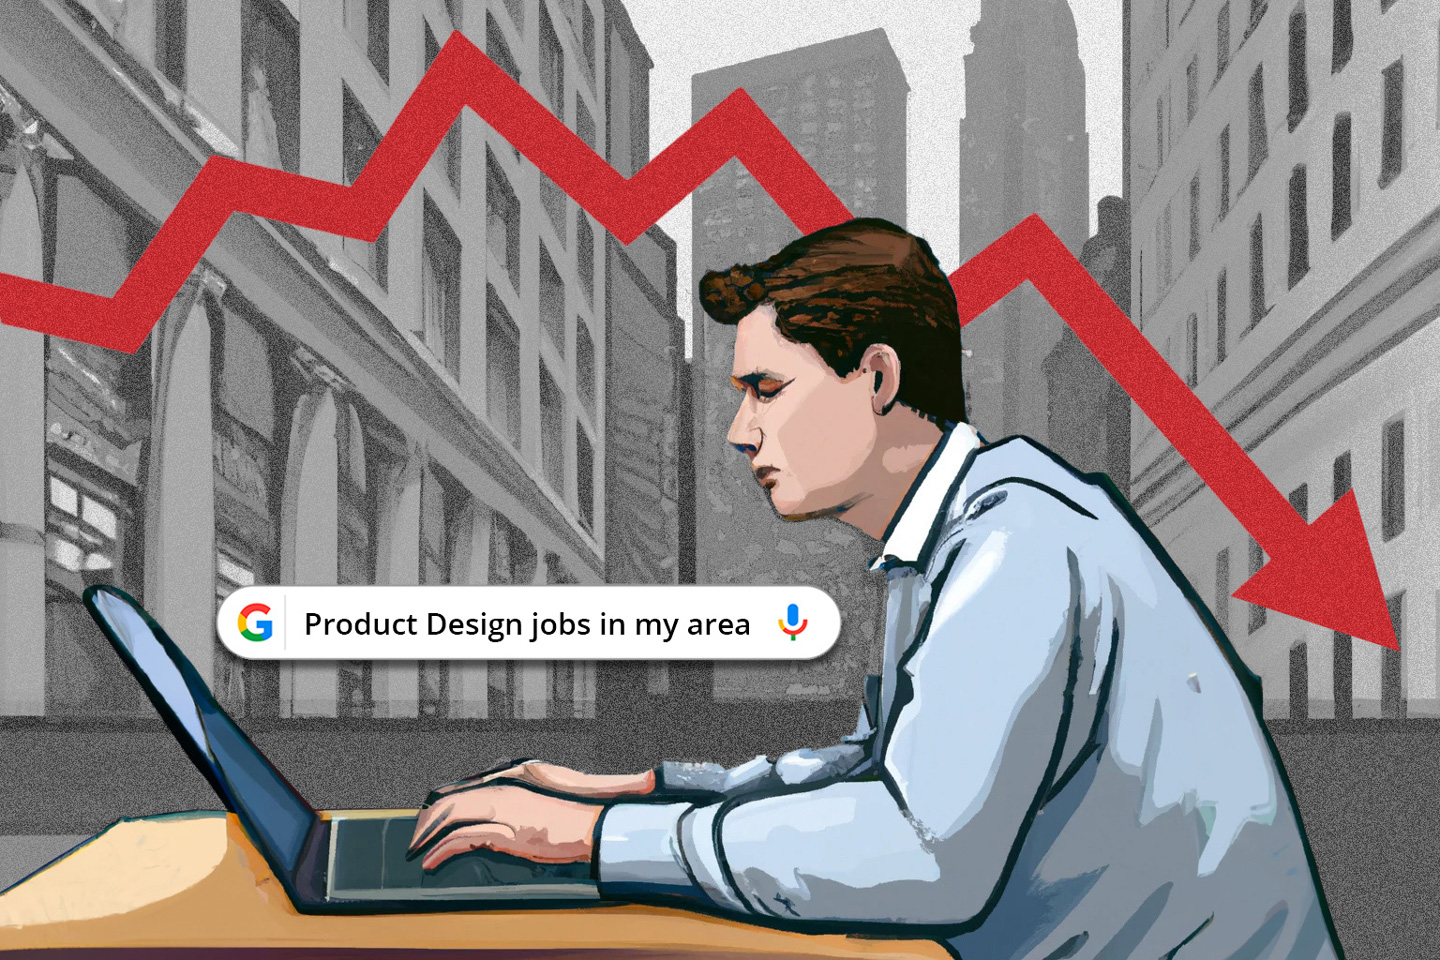 #How to find a job as a designer in an economic recession